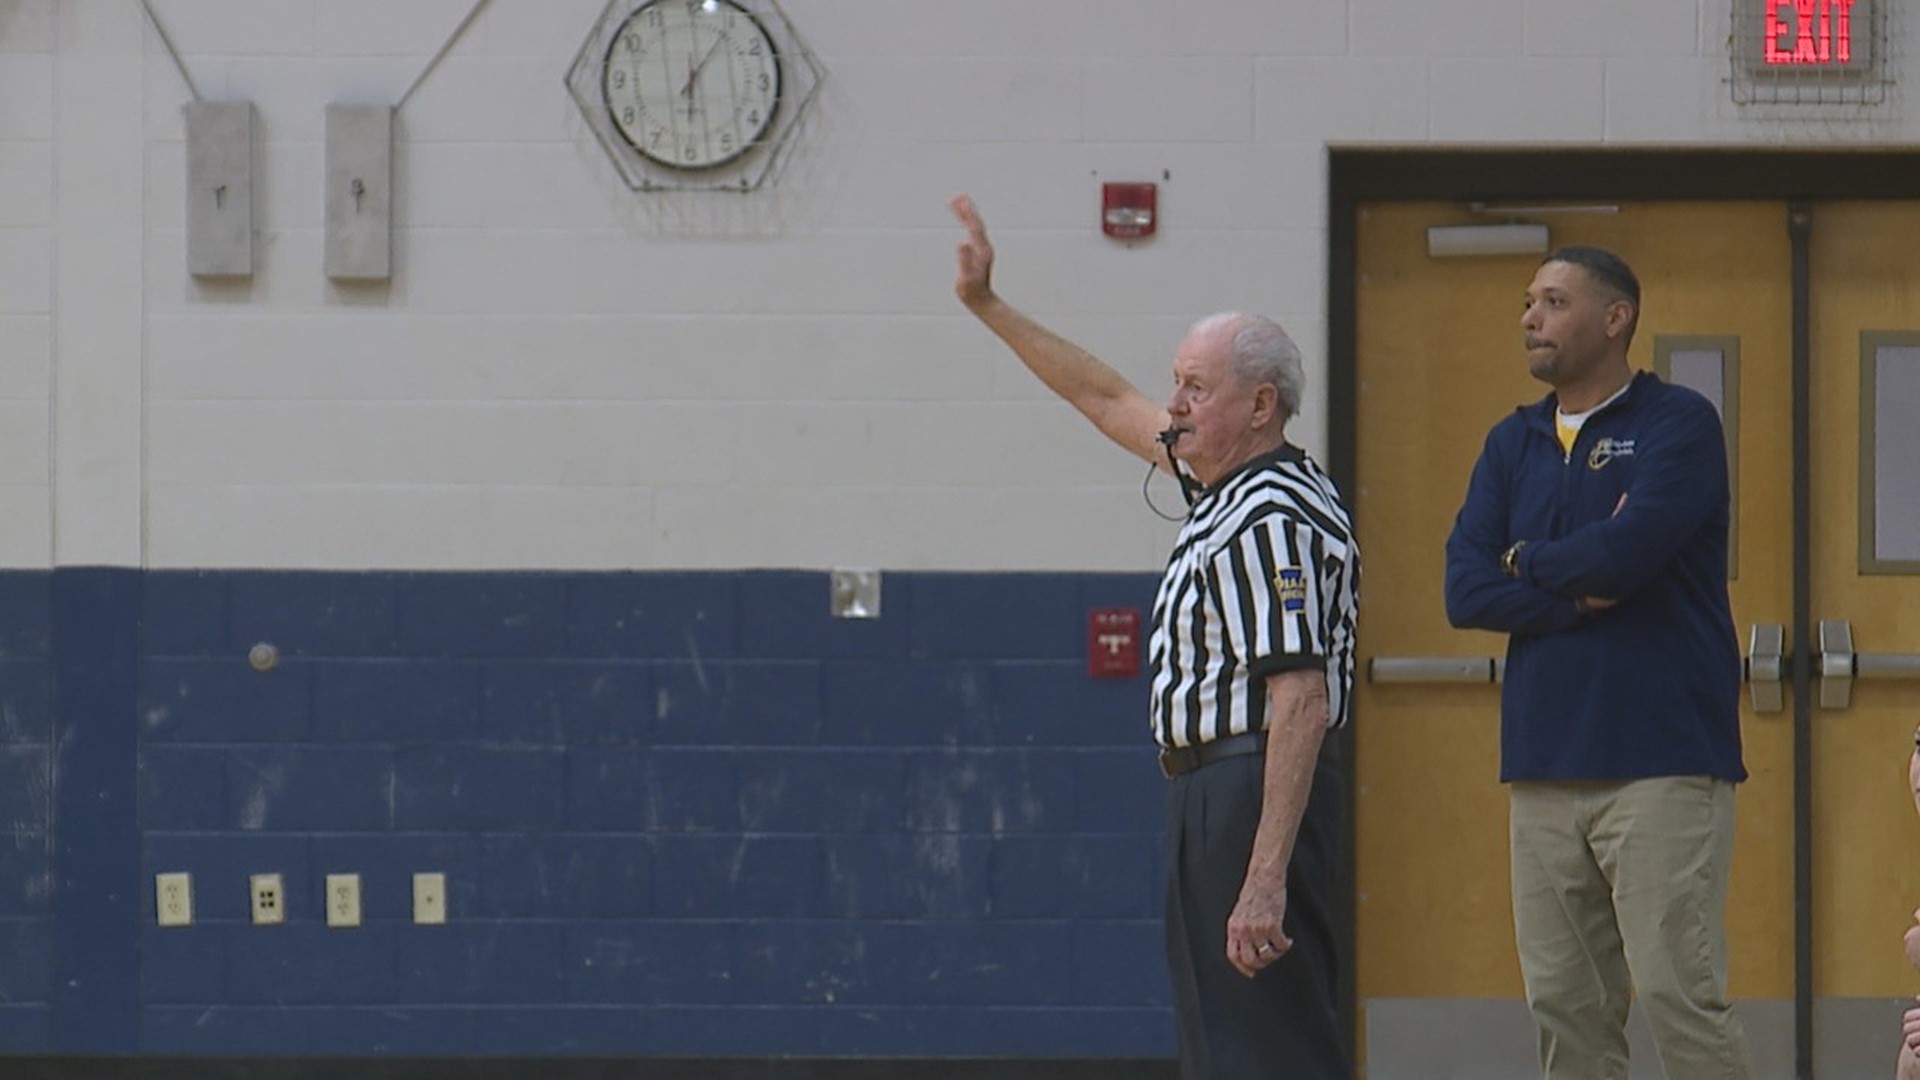 Gene Groft is going strong in his 56th season as a PIAA official and doesn't plan to stop anytime soon.